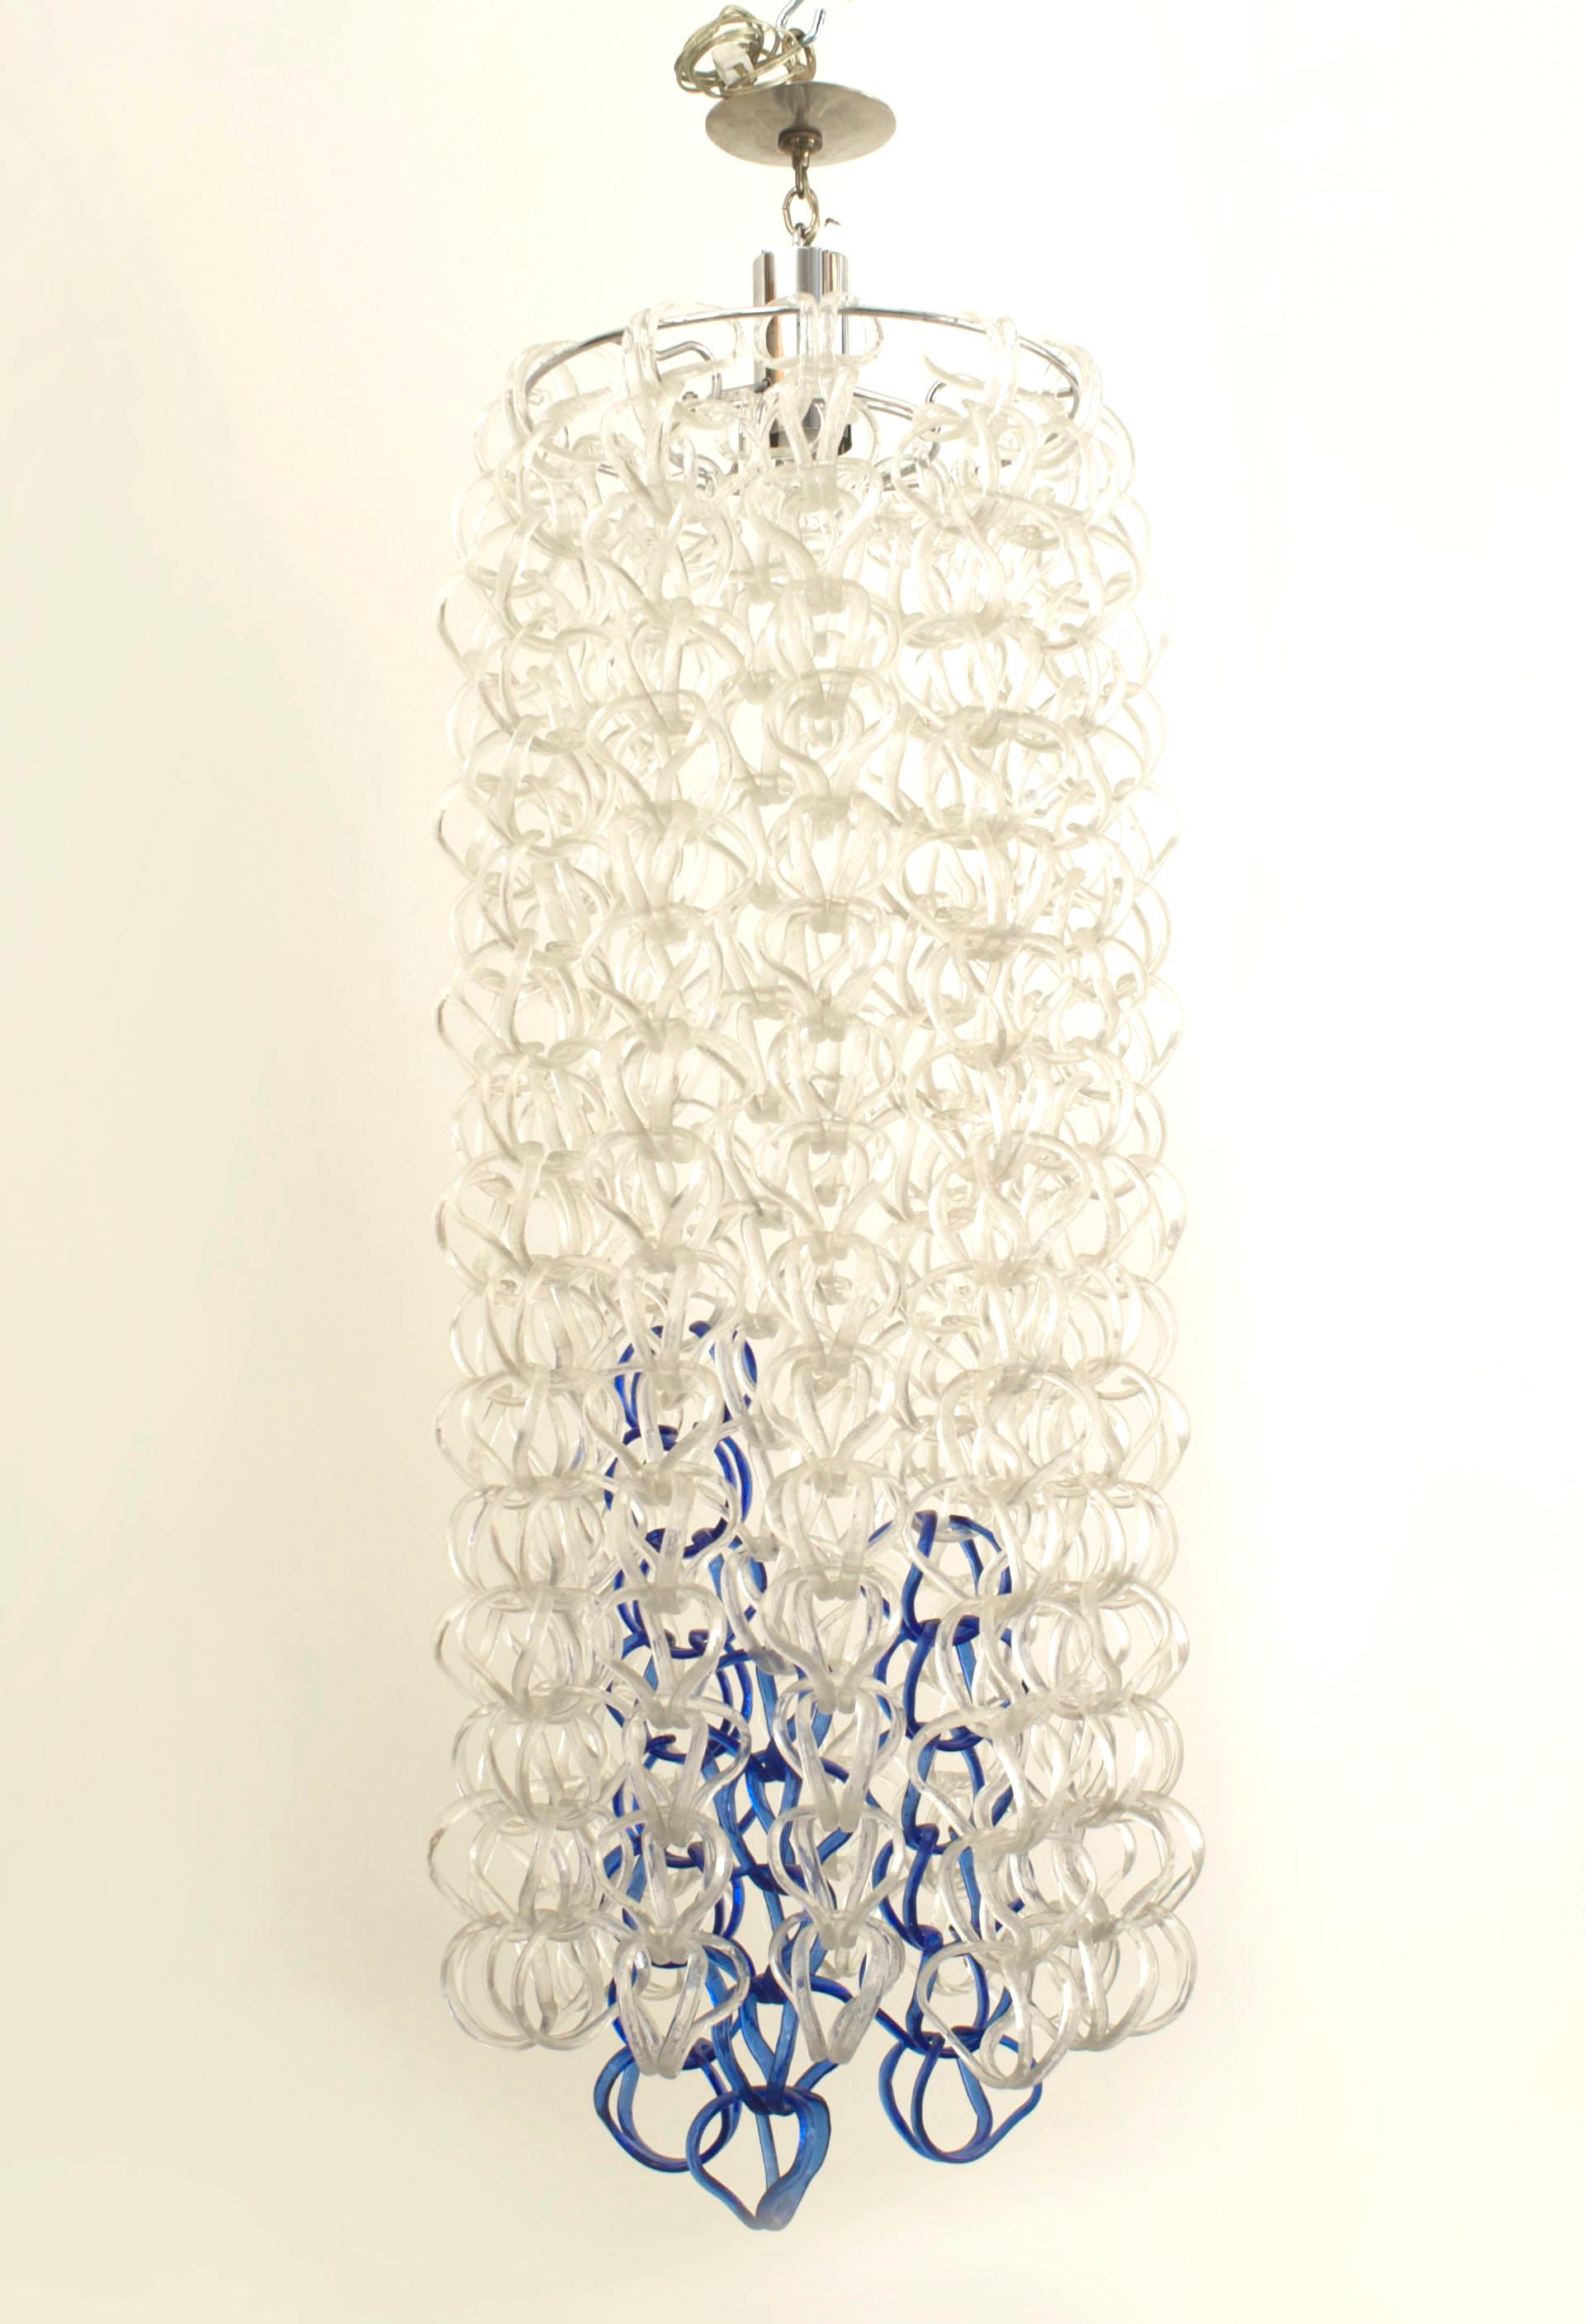 Italian Post-War Design (1960s) chandelier with crystallized clear & blue glass in the form of interlocking rings suspended from a chrome canopy. (by ANGELO MANGIAROTTI for VISTOSI)
